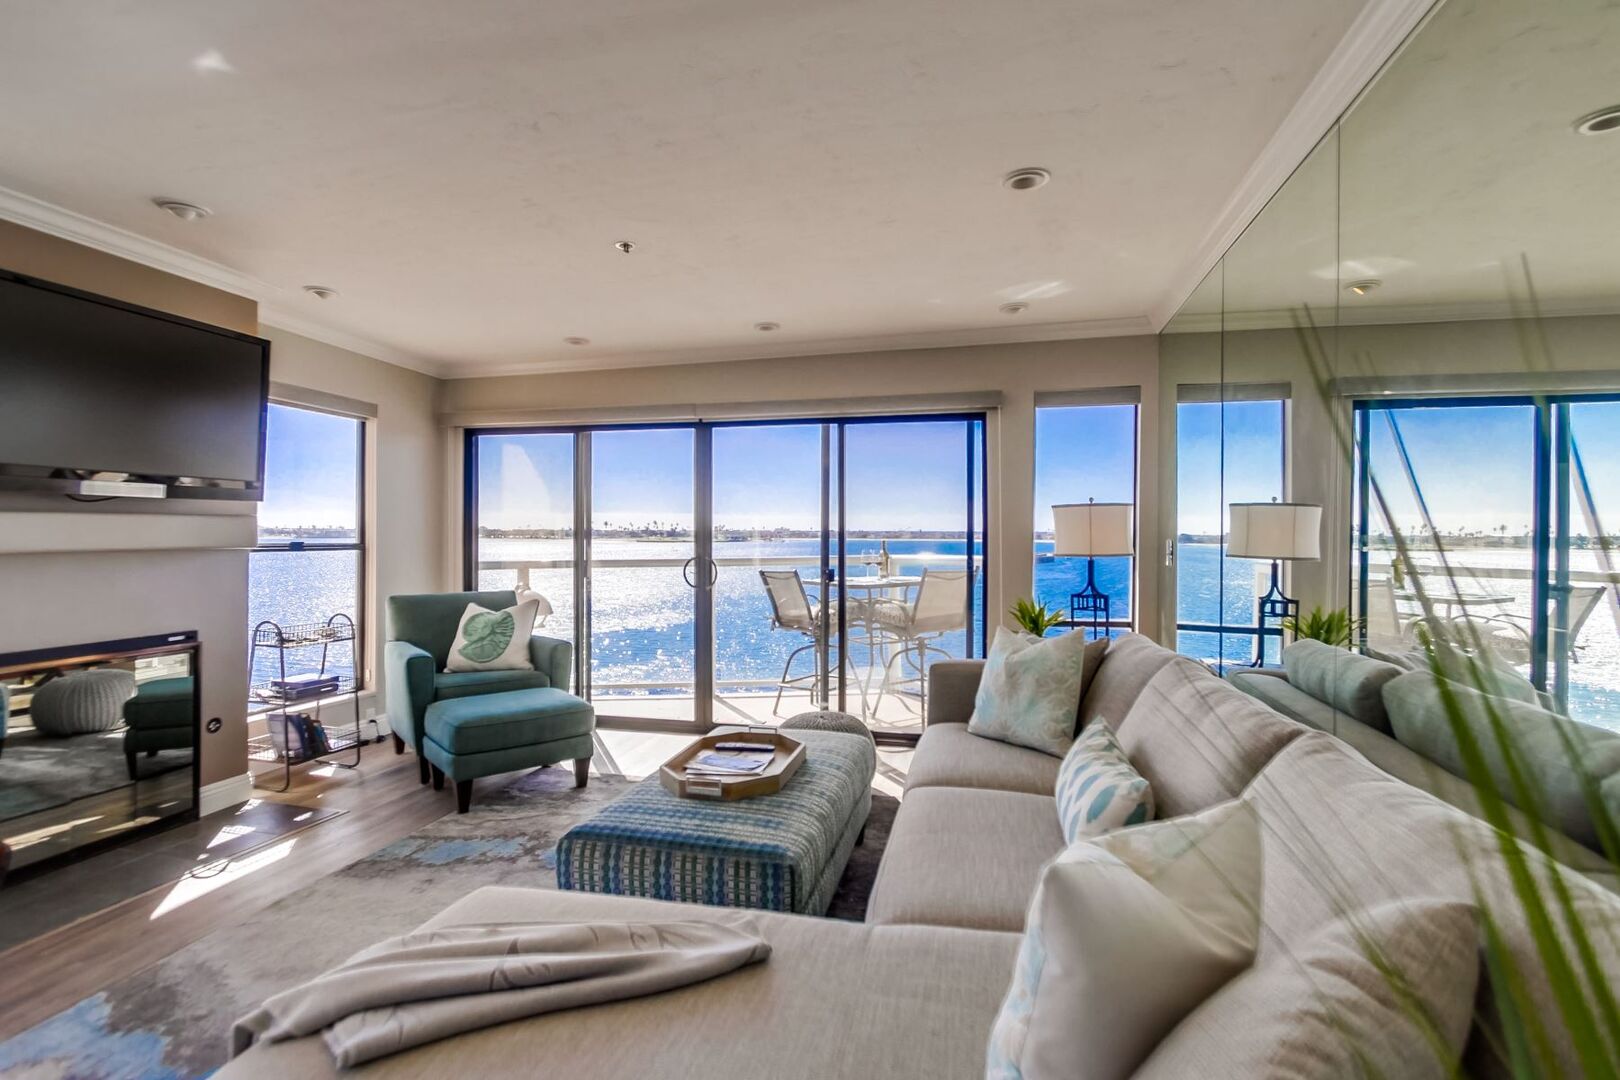 Living room with stunning views of the bay